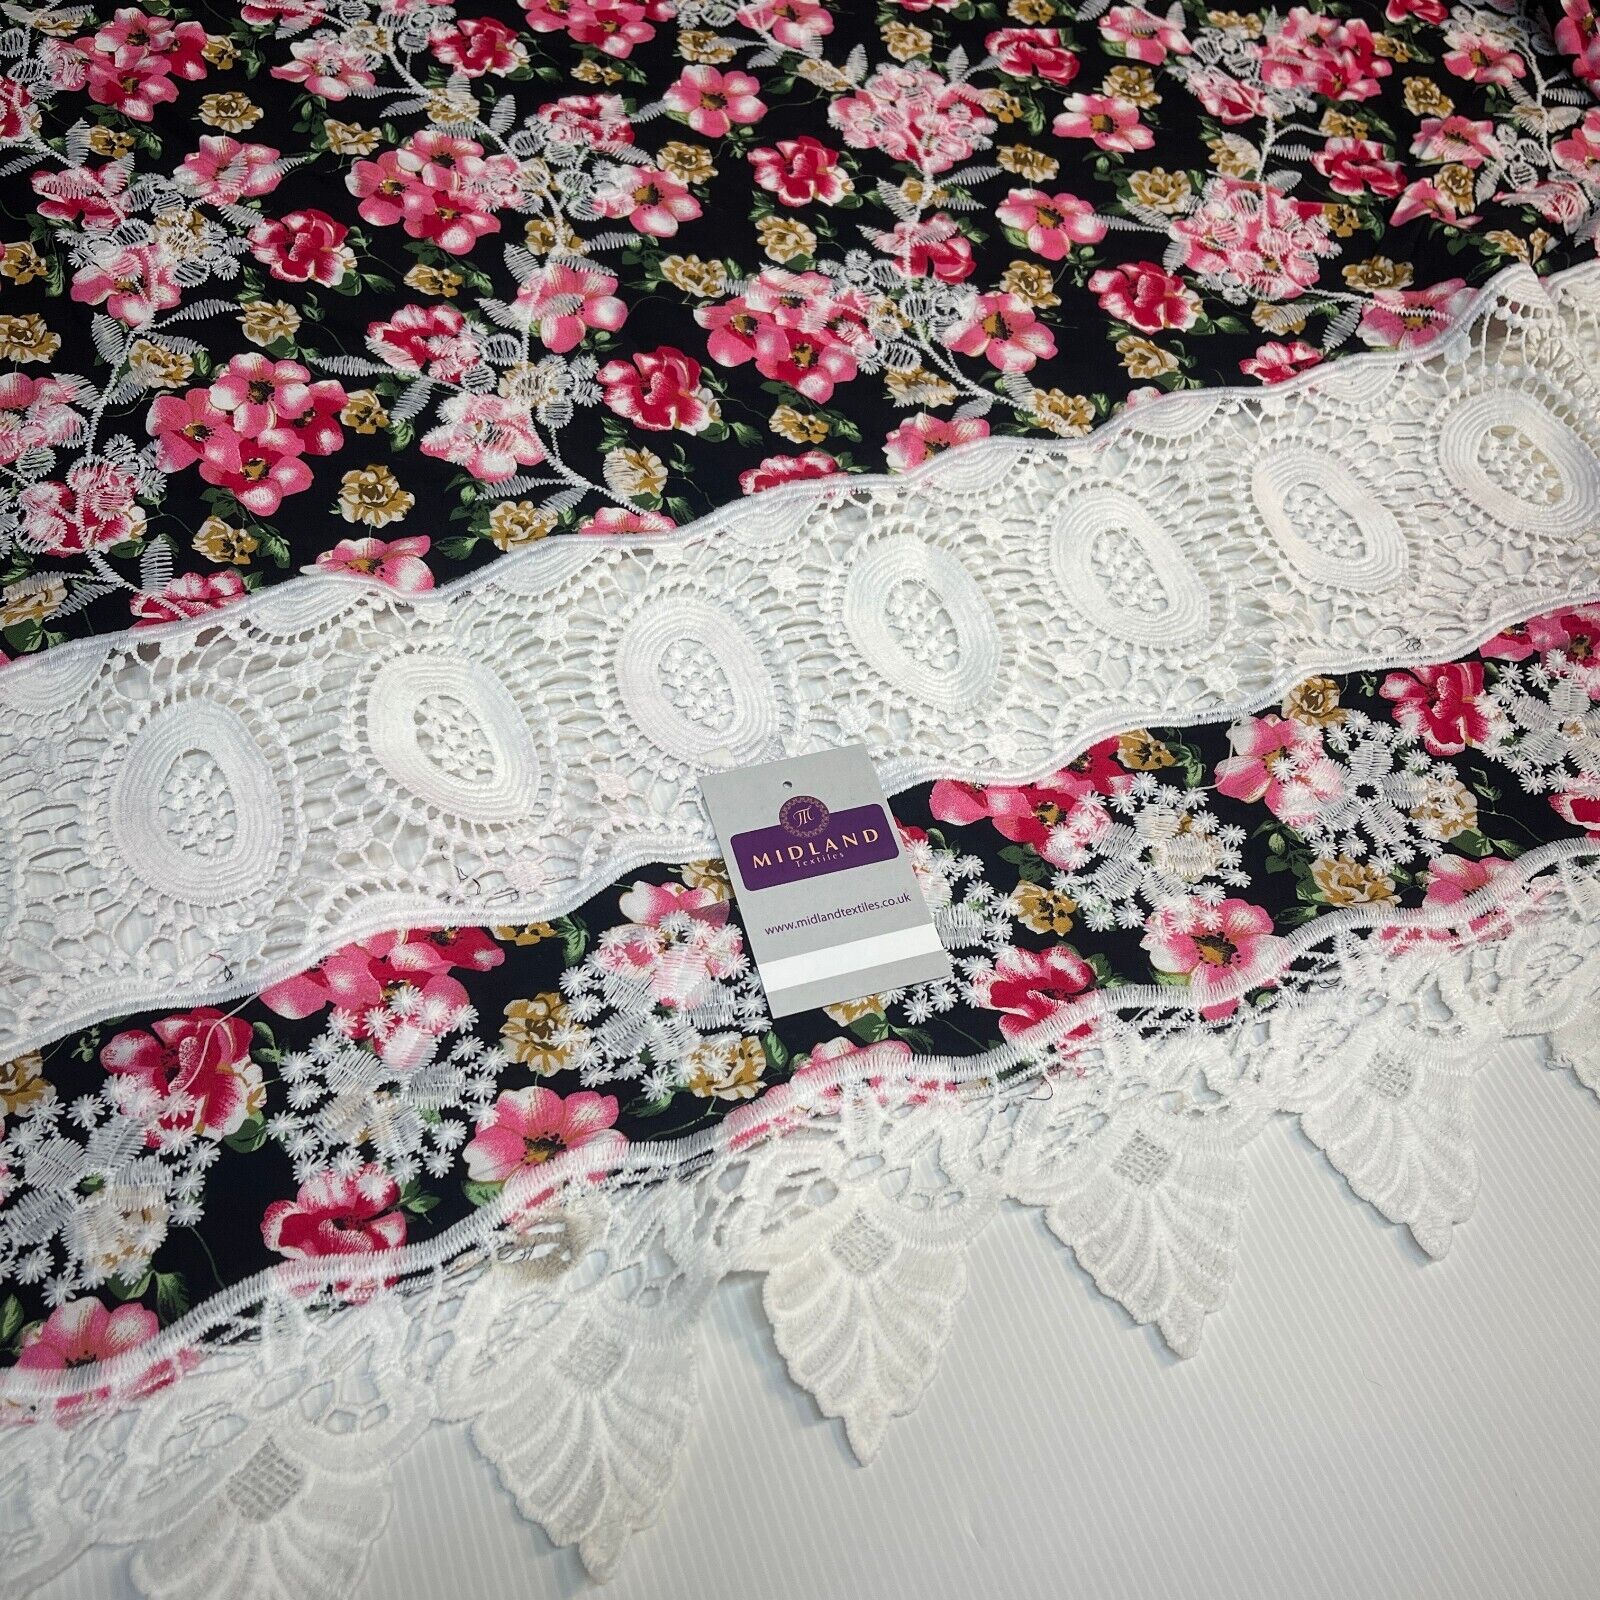 Corded Lace Fabric Ivory 146cm